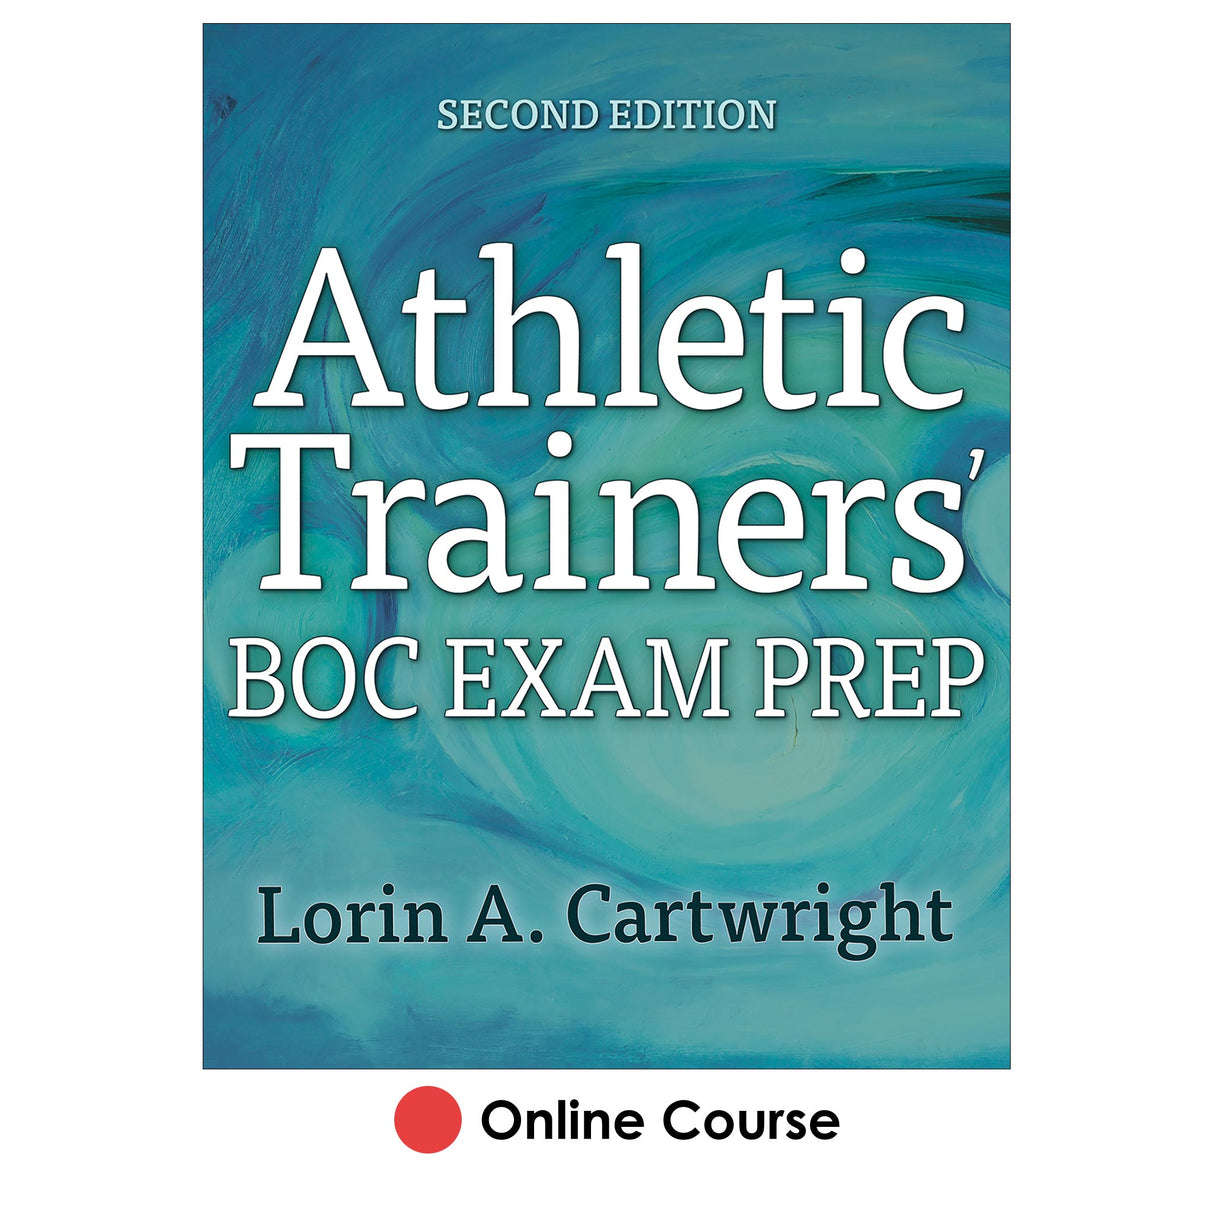 Athletic Trainers' BOC Exam Prep 2nd Edition Online Course